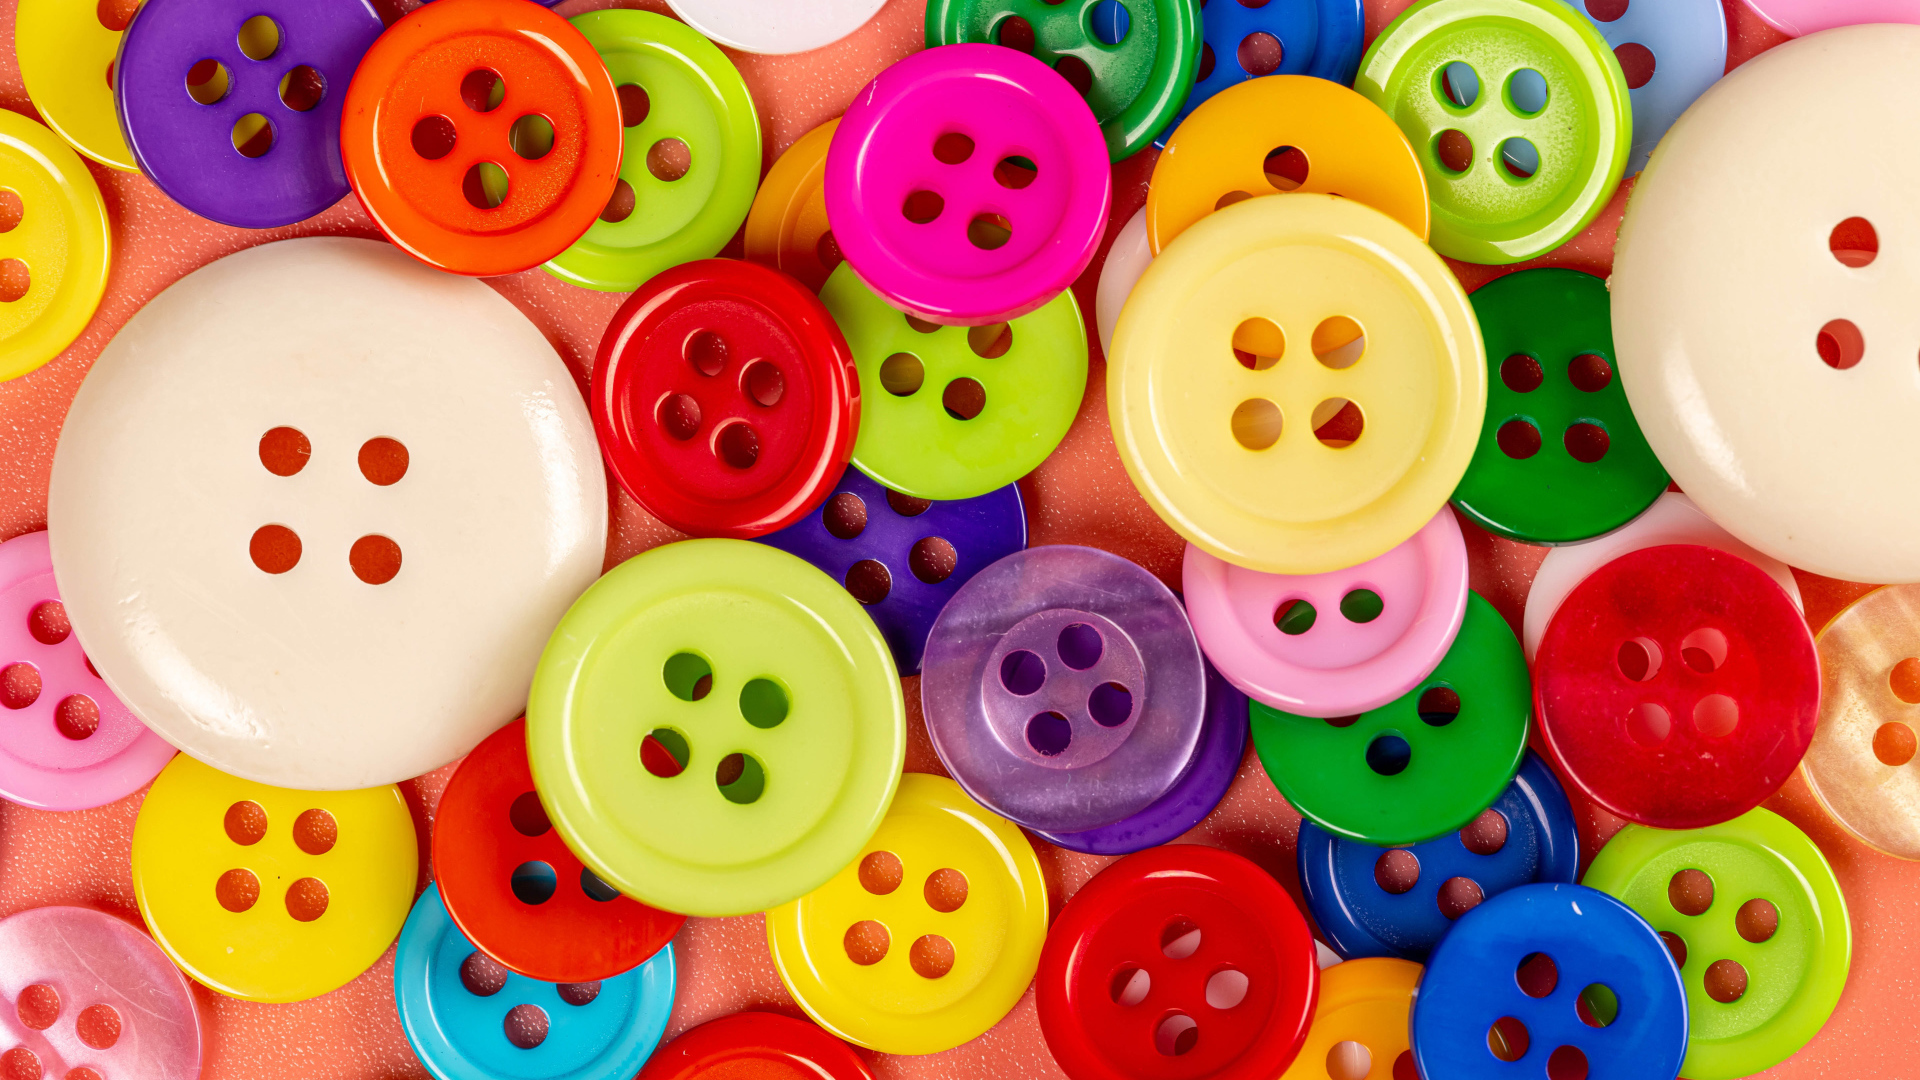 Many multi-colored buttons of different sizes